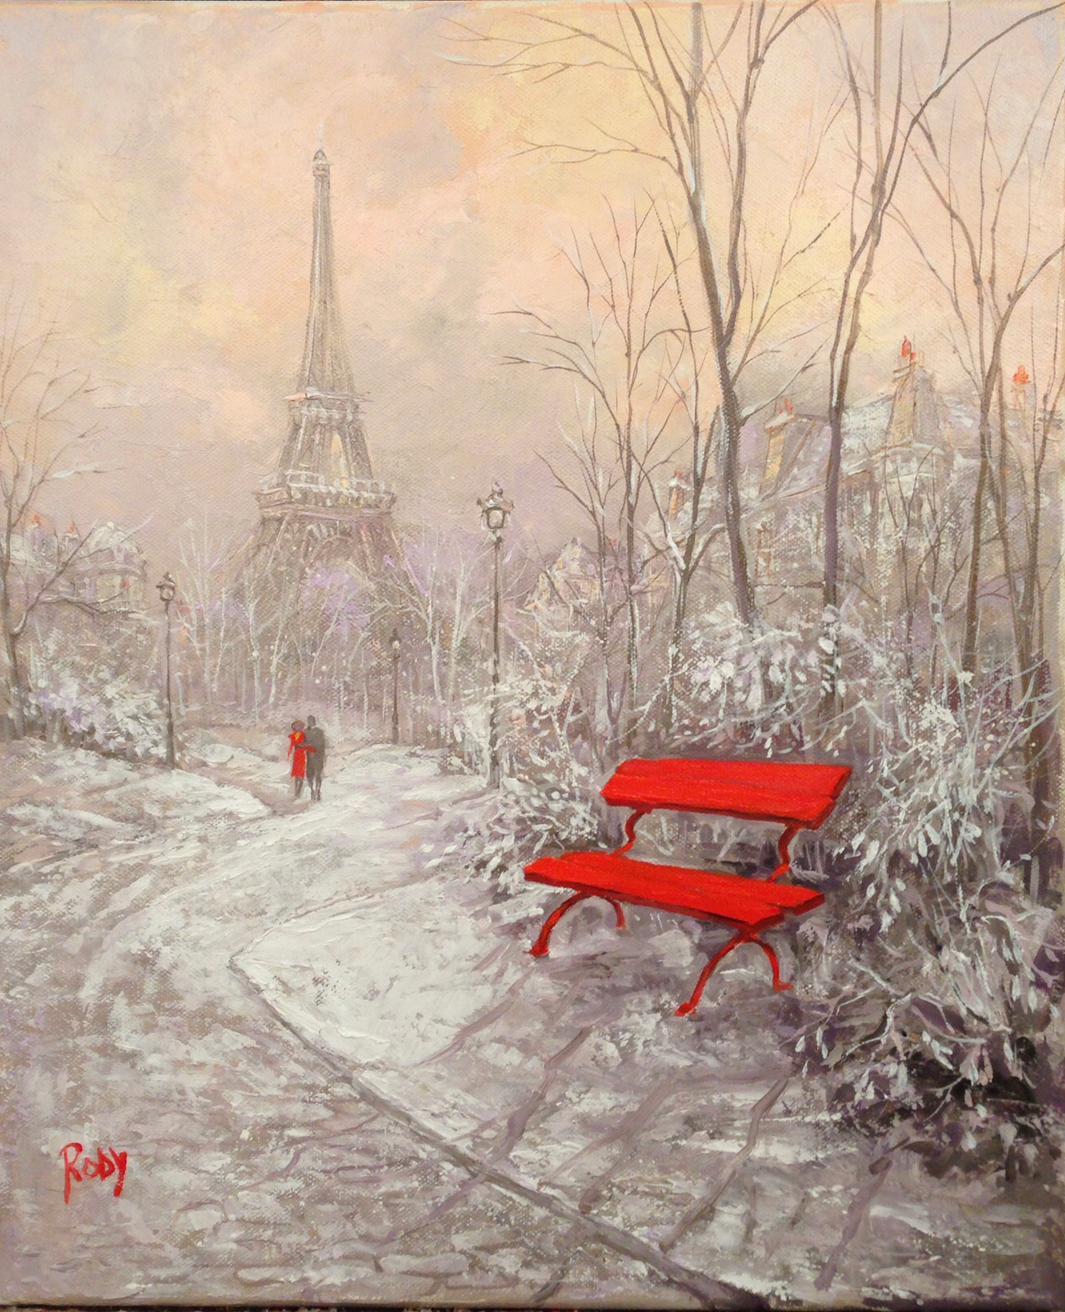 Eiffel Tower in winter - Painting by Rodica Iliesco